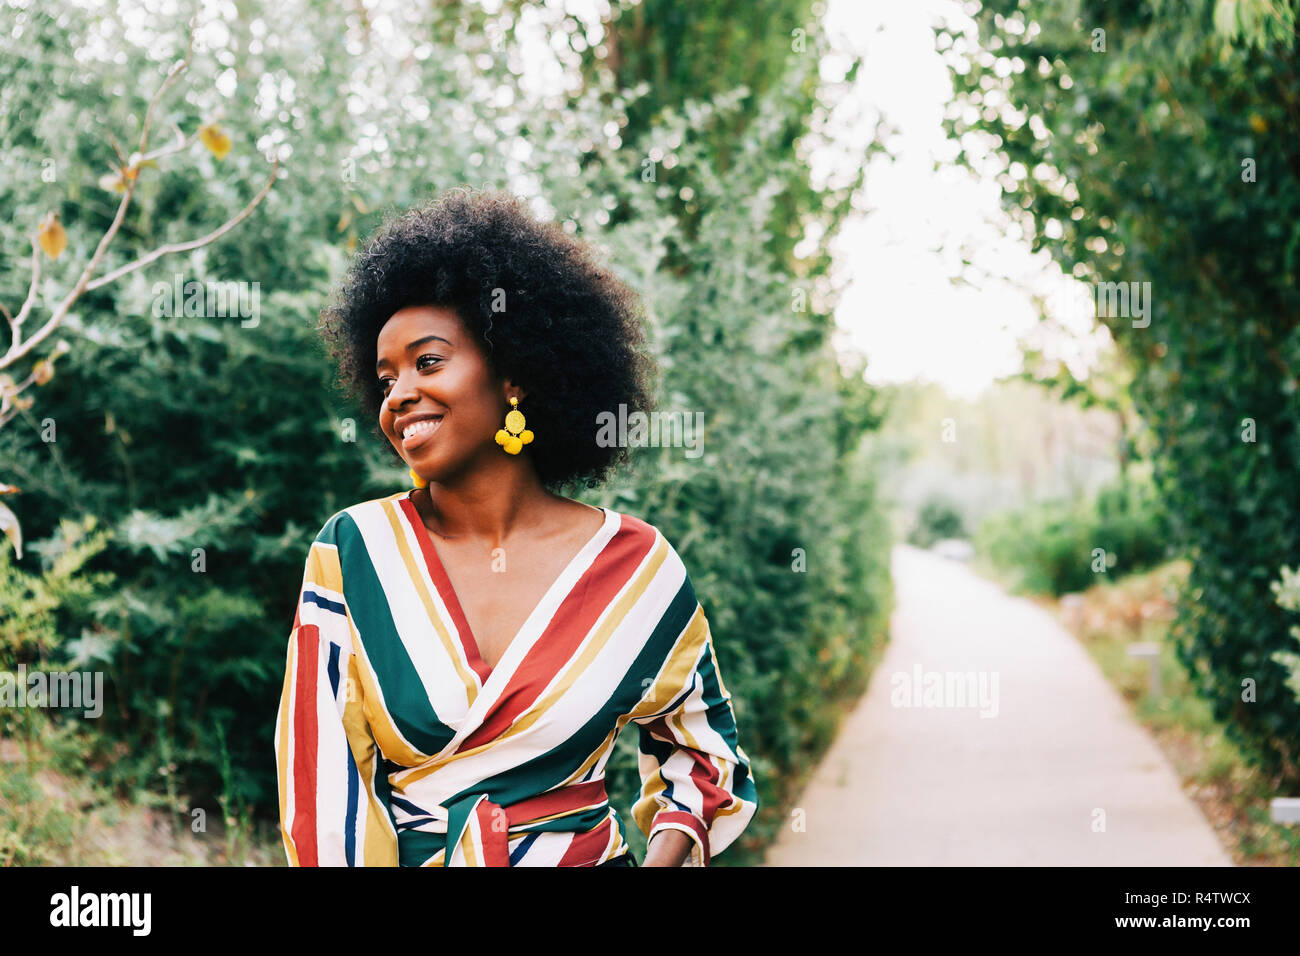 Confident young woman on path in park Stock Photo